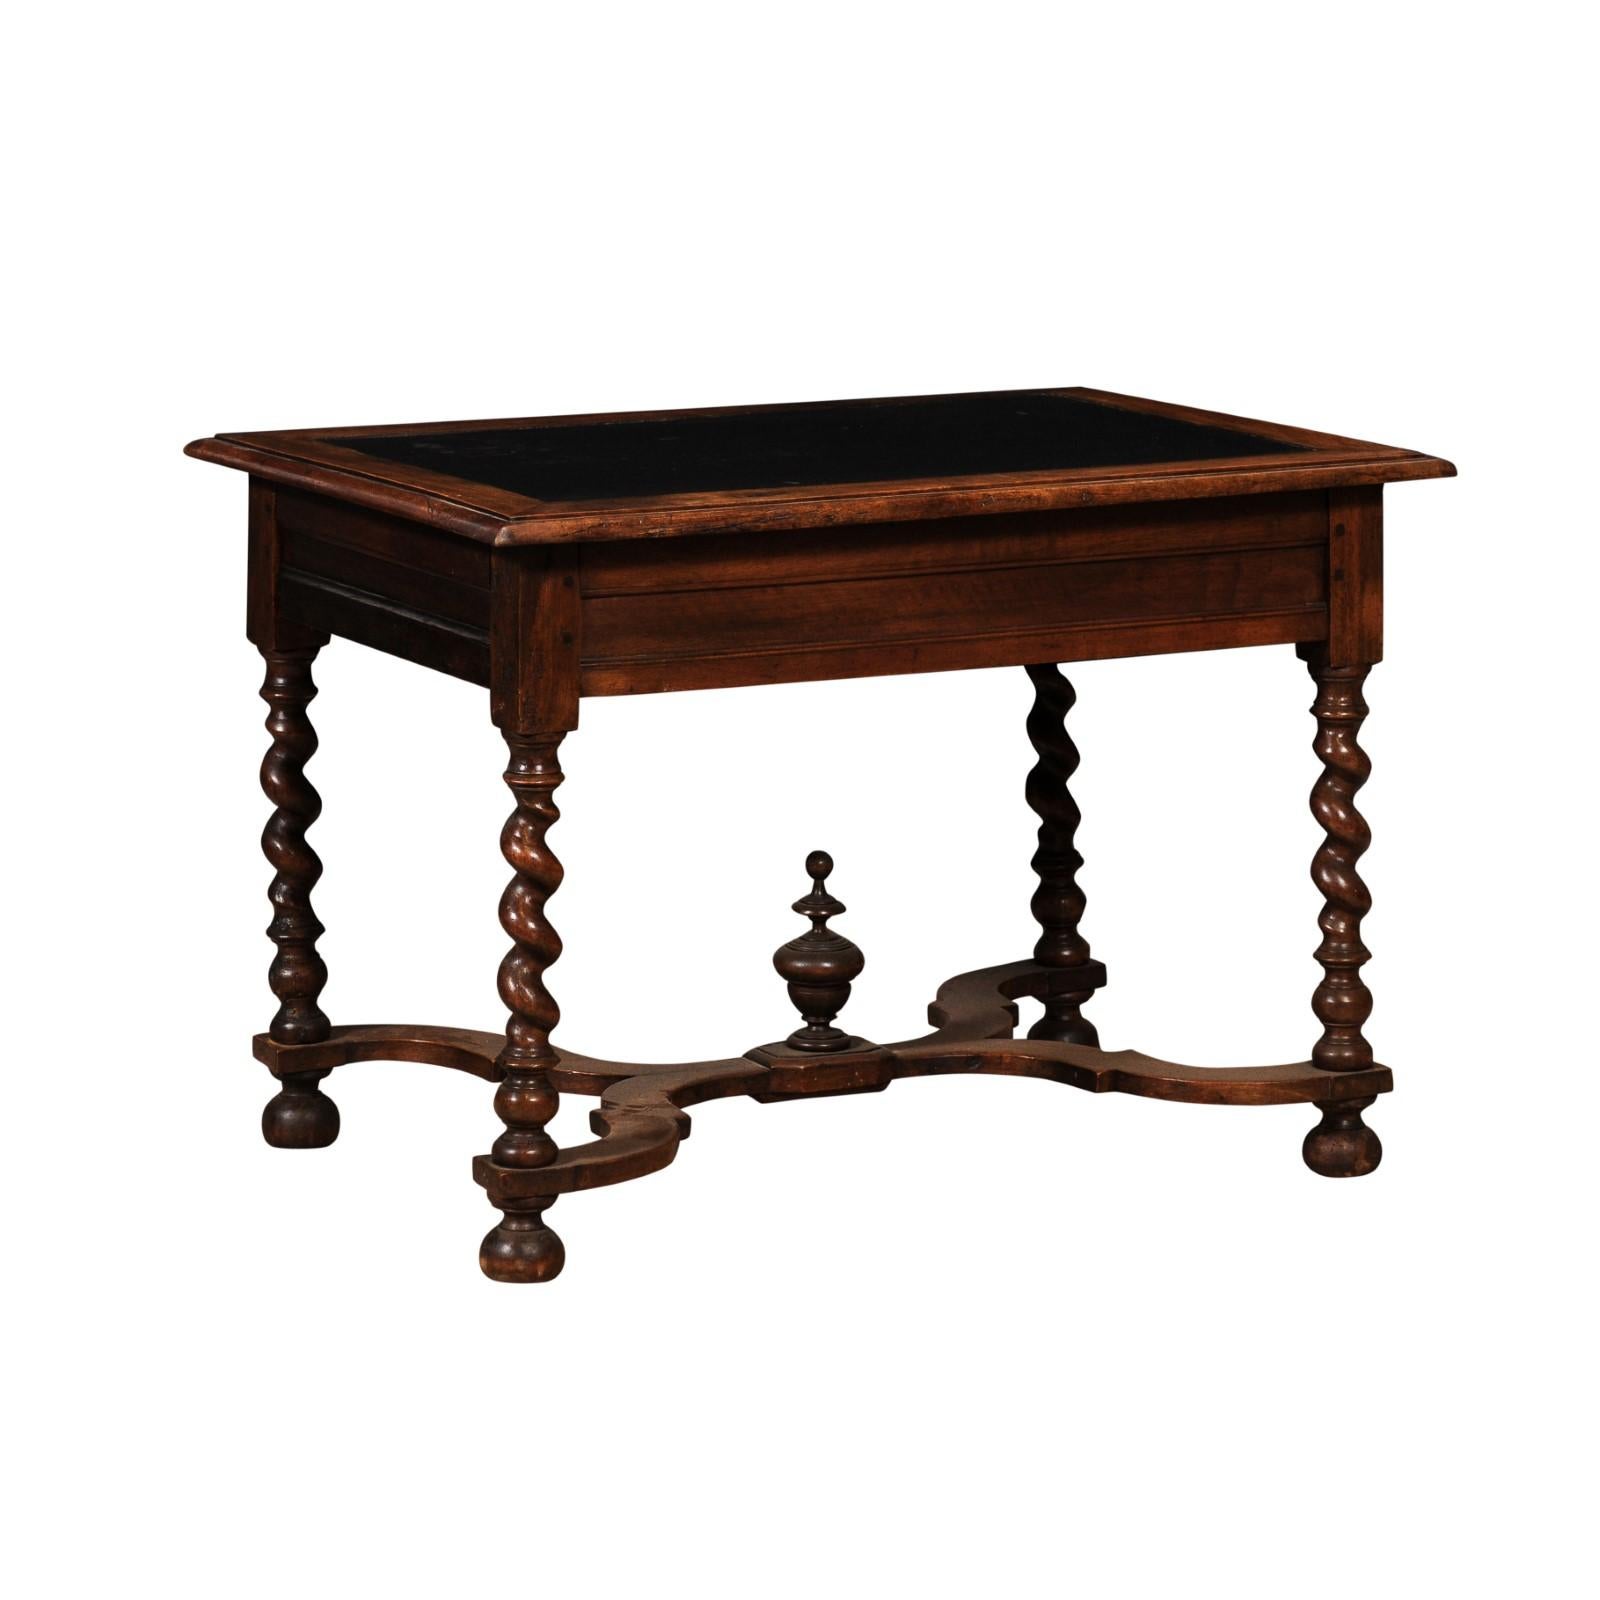 Louis XIII Period 1630s Carved Walnut Barley Twist Table with Black Painted Top For Sale 7